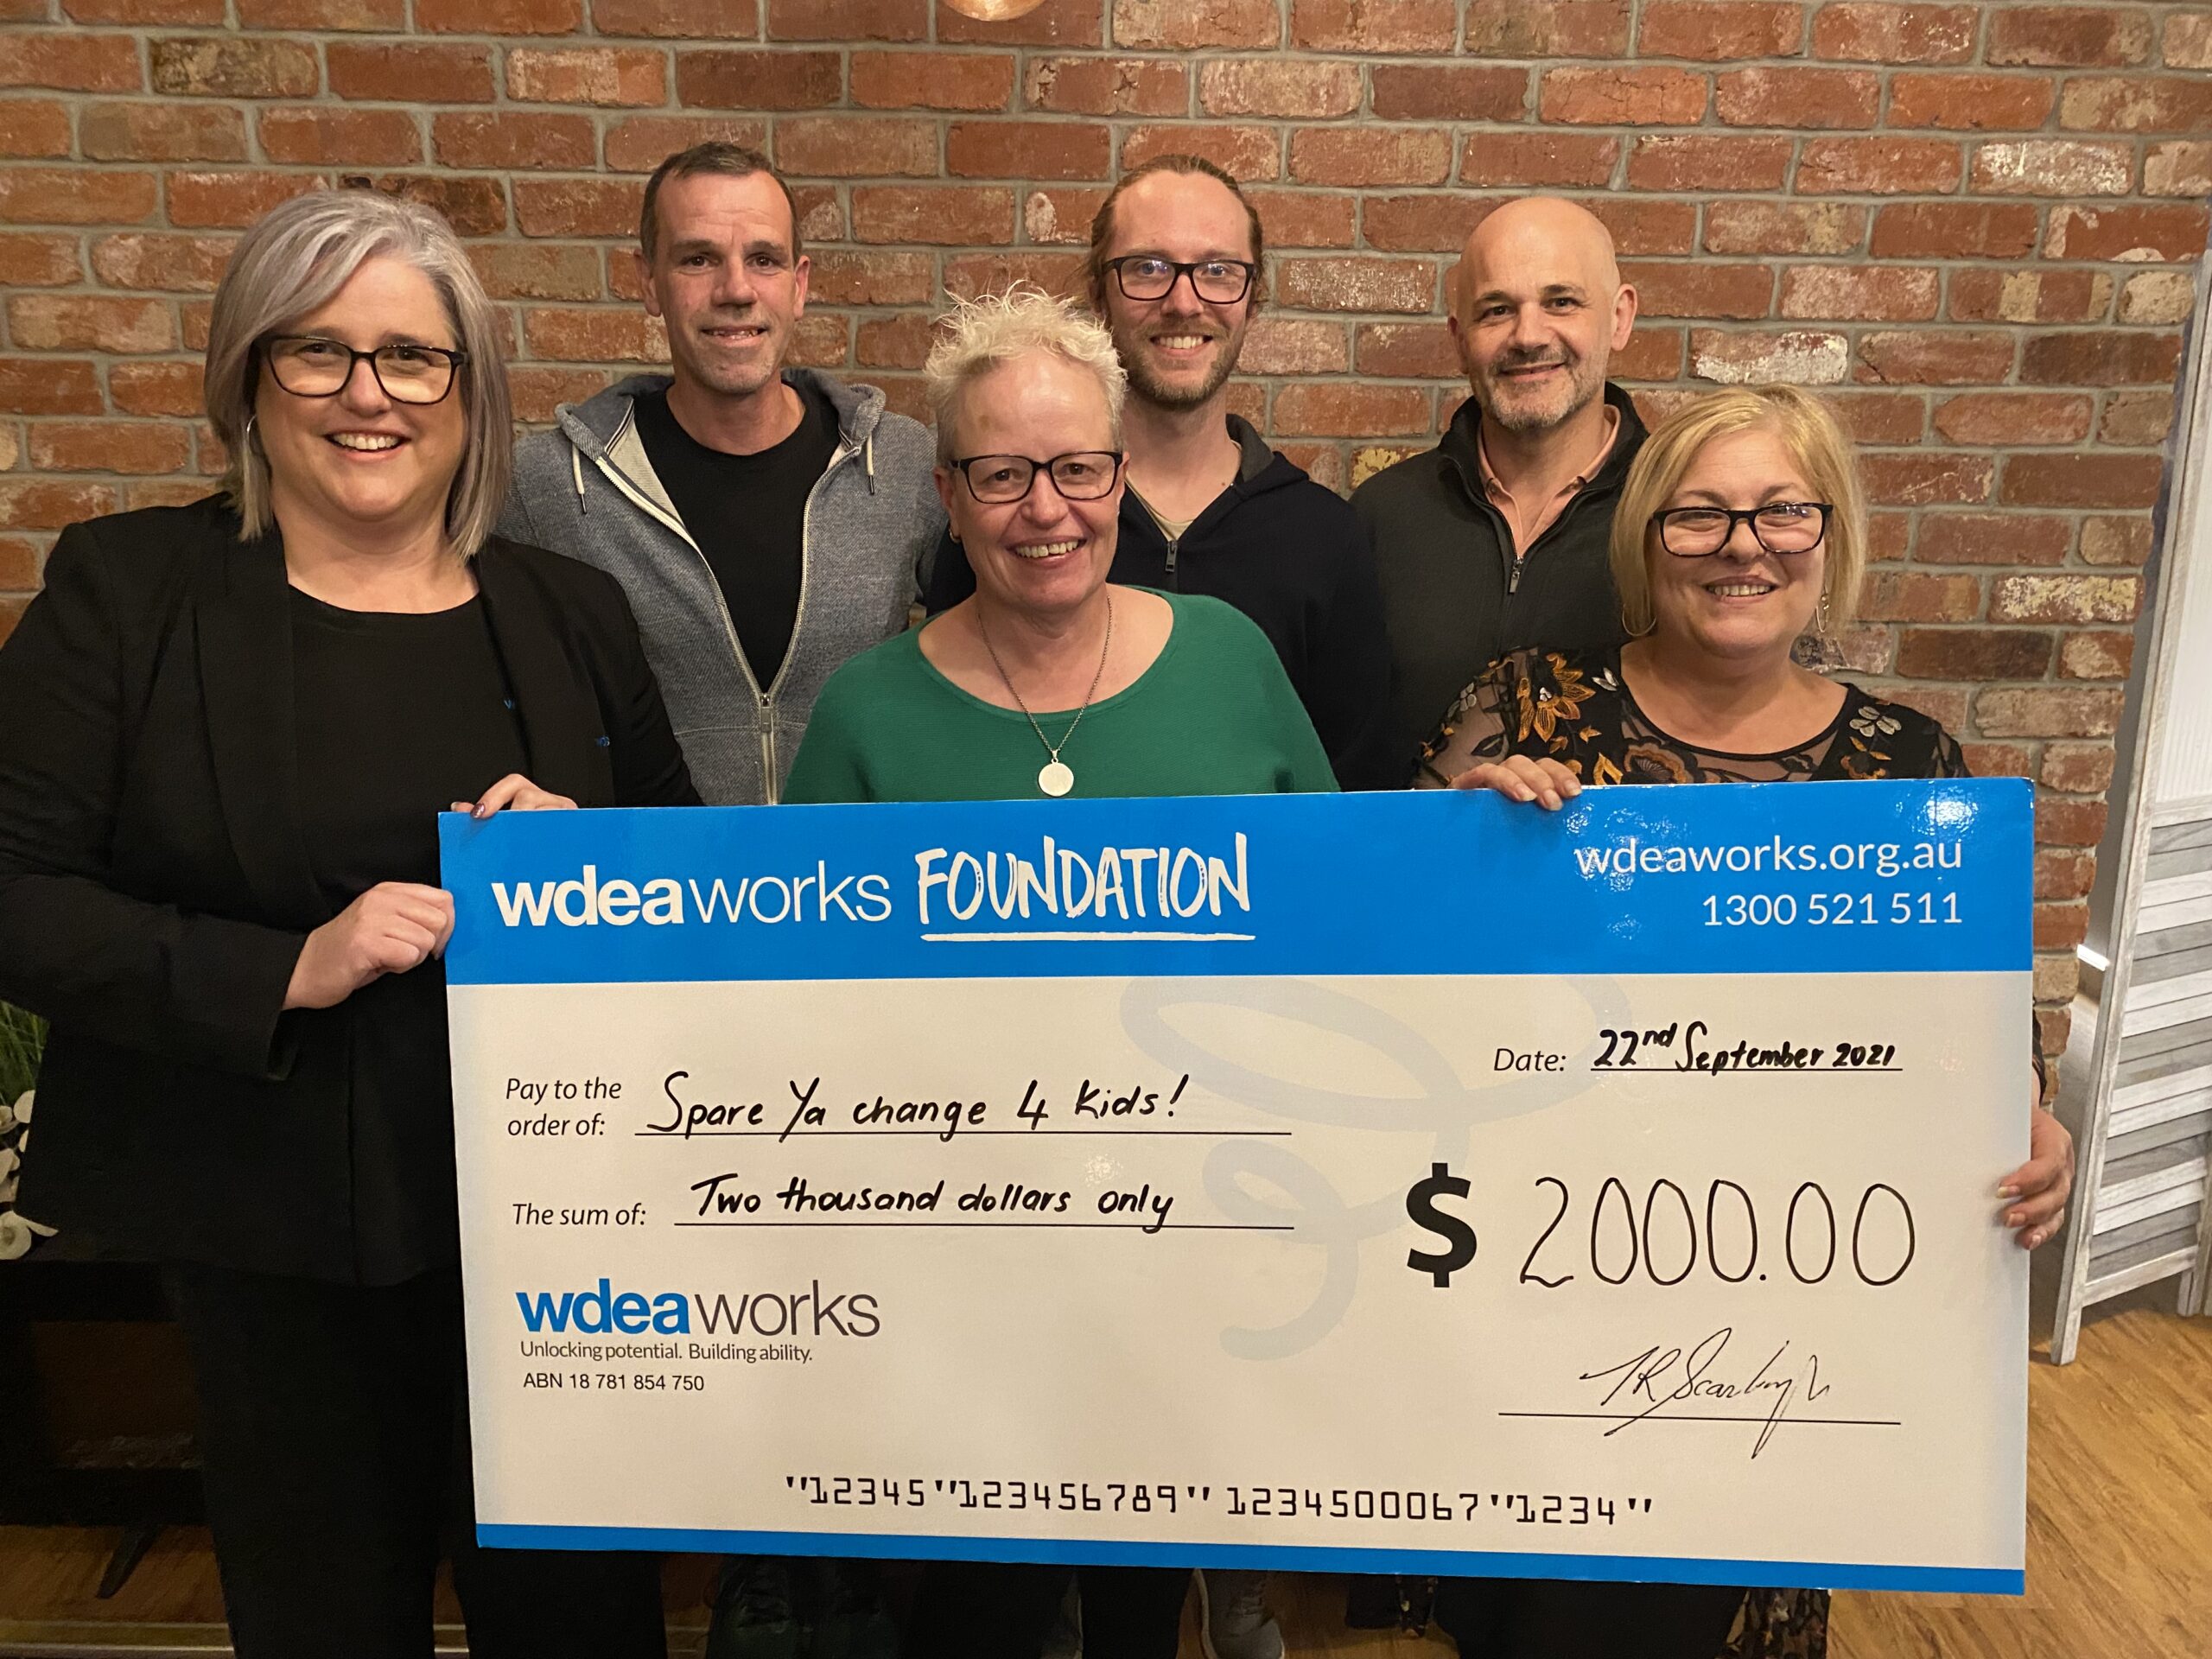 WDEA Works Mt Gambier support provides 300 meals through Spare Ya Change for Kids